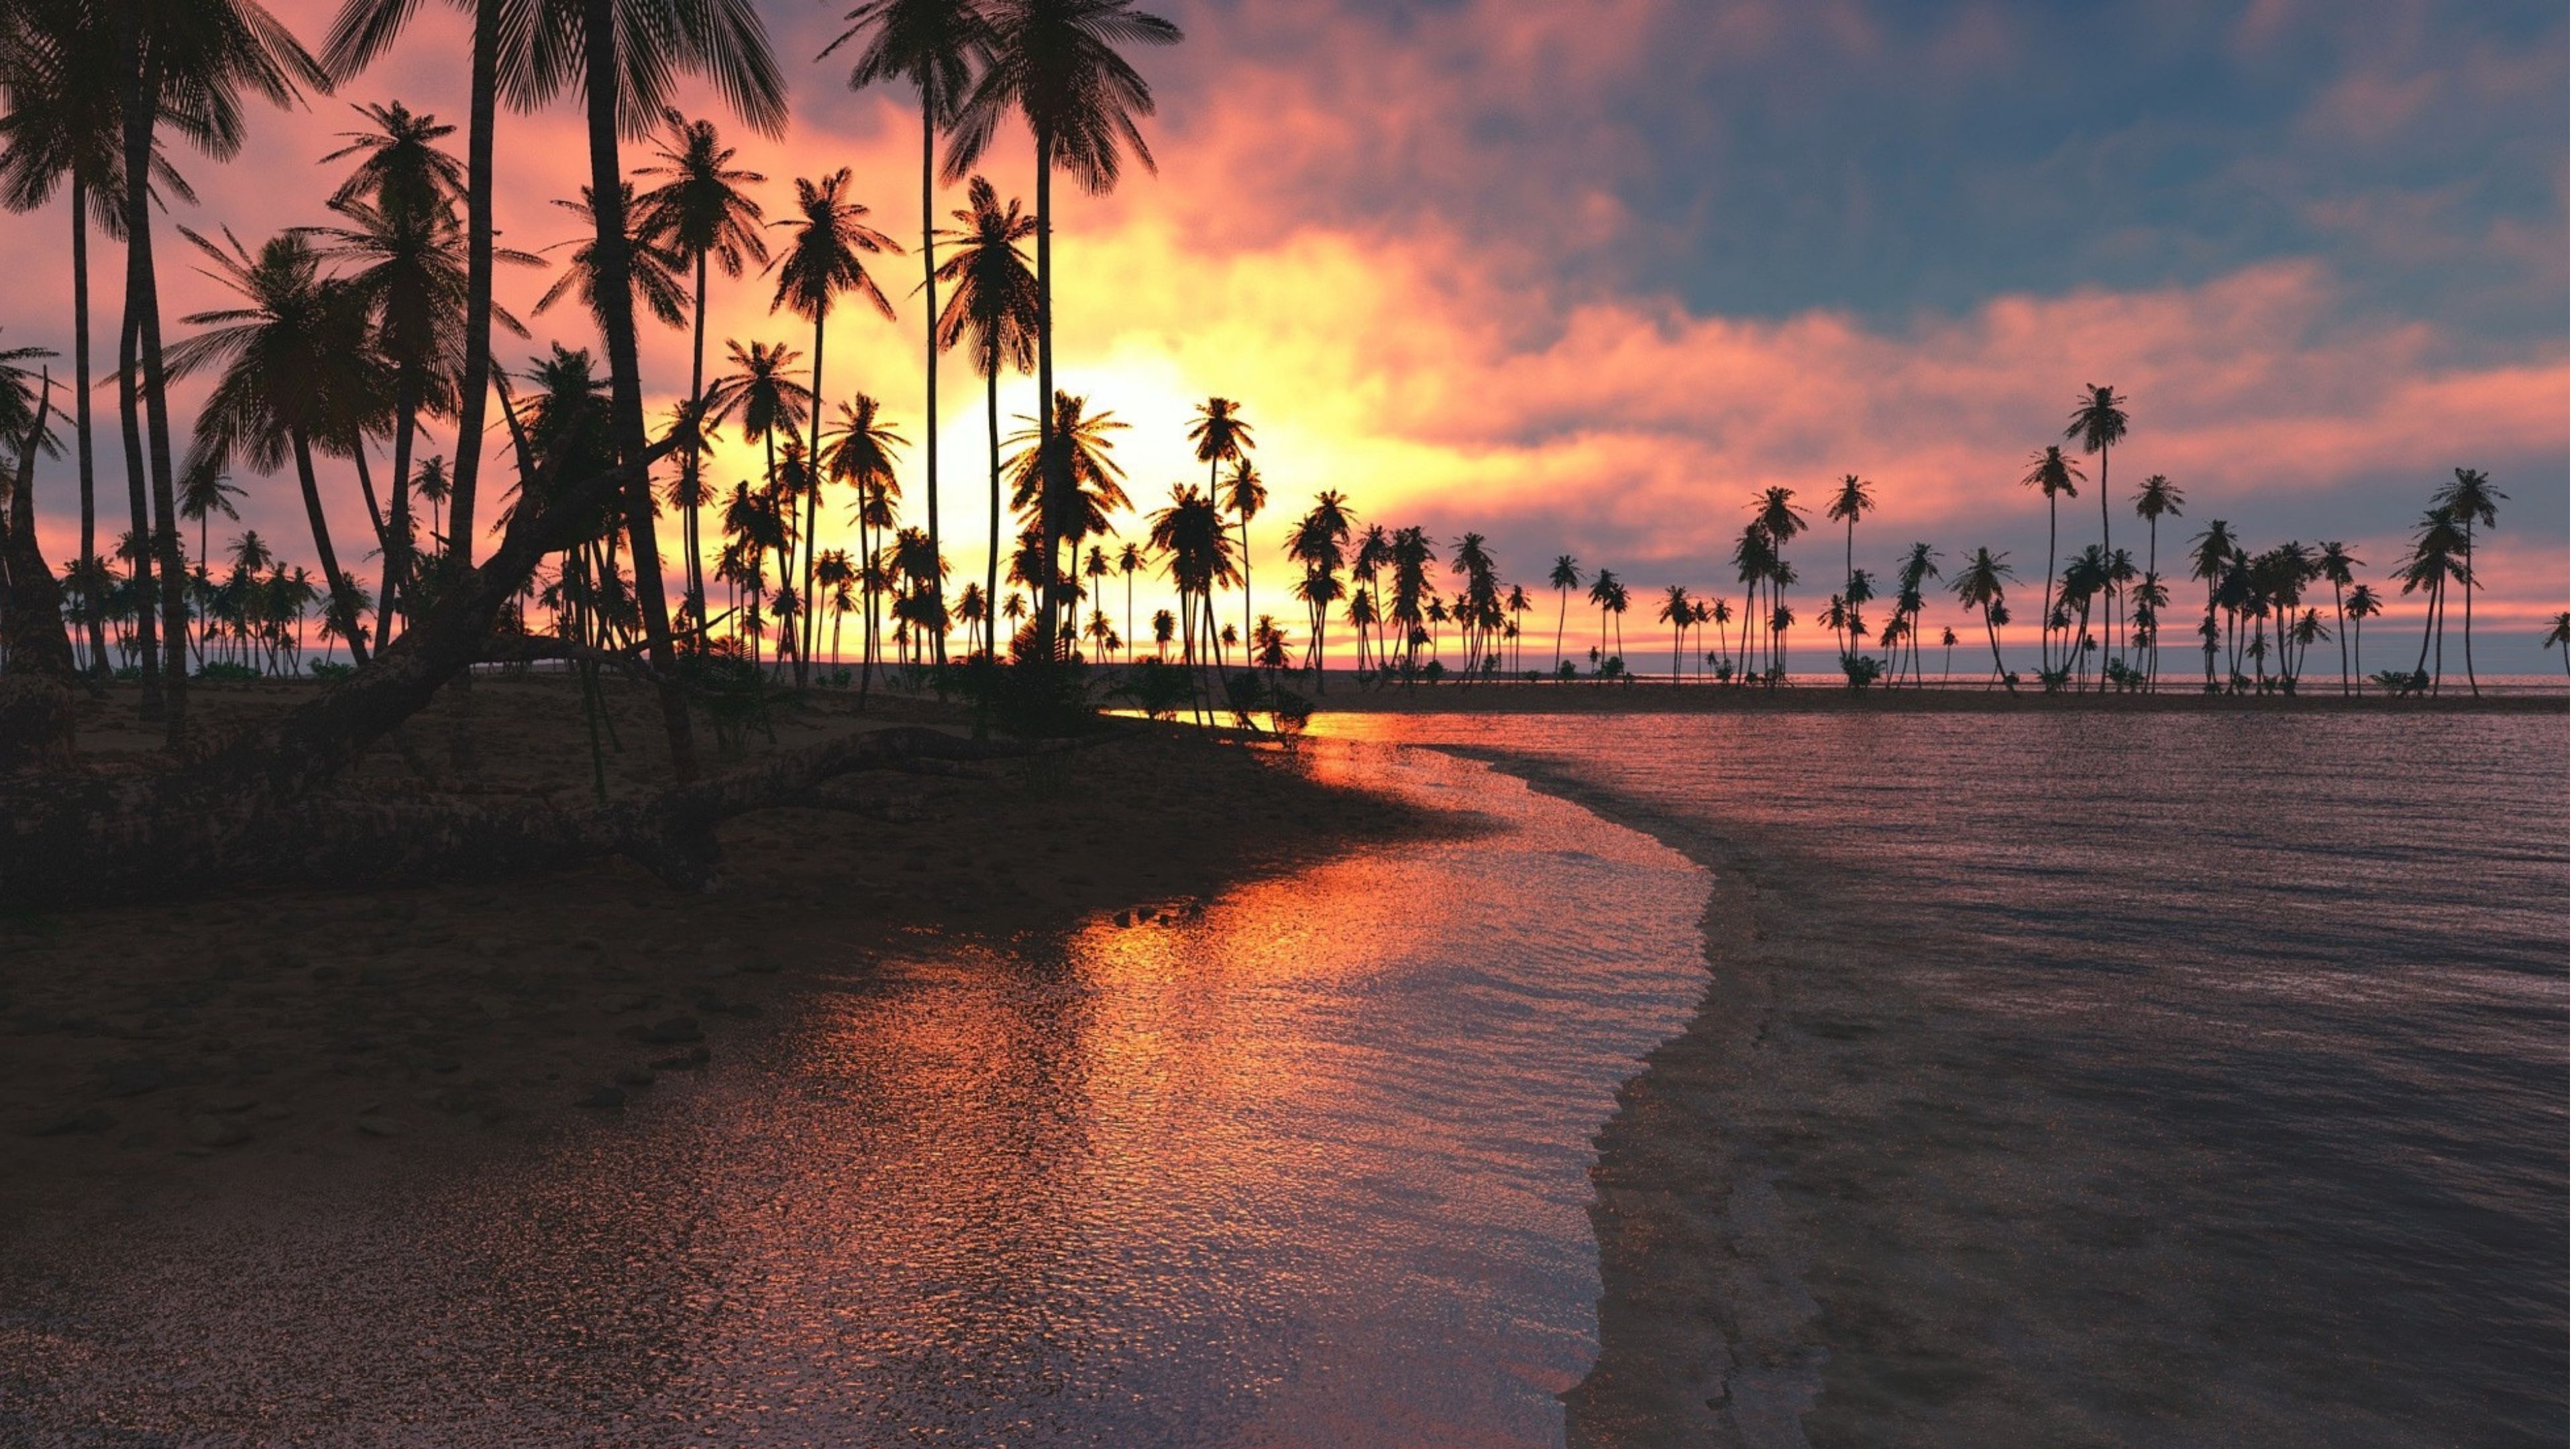 A beach with palm trees and a sunset in the background - Sunset